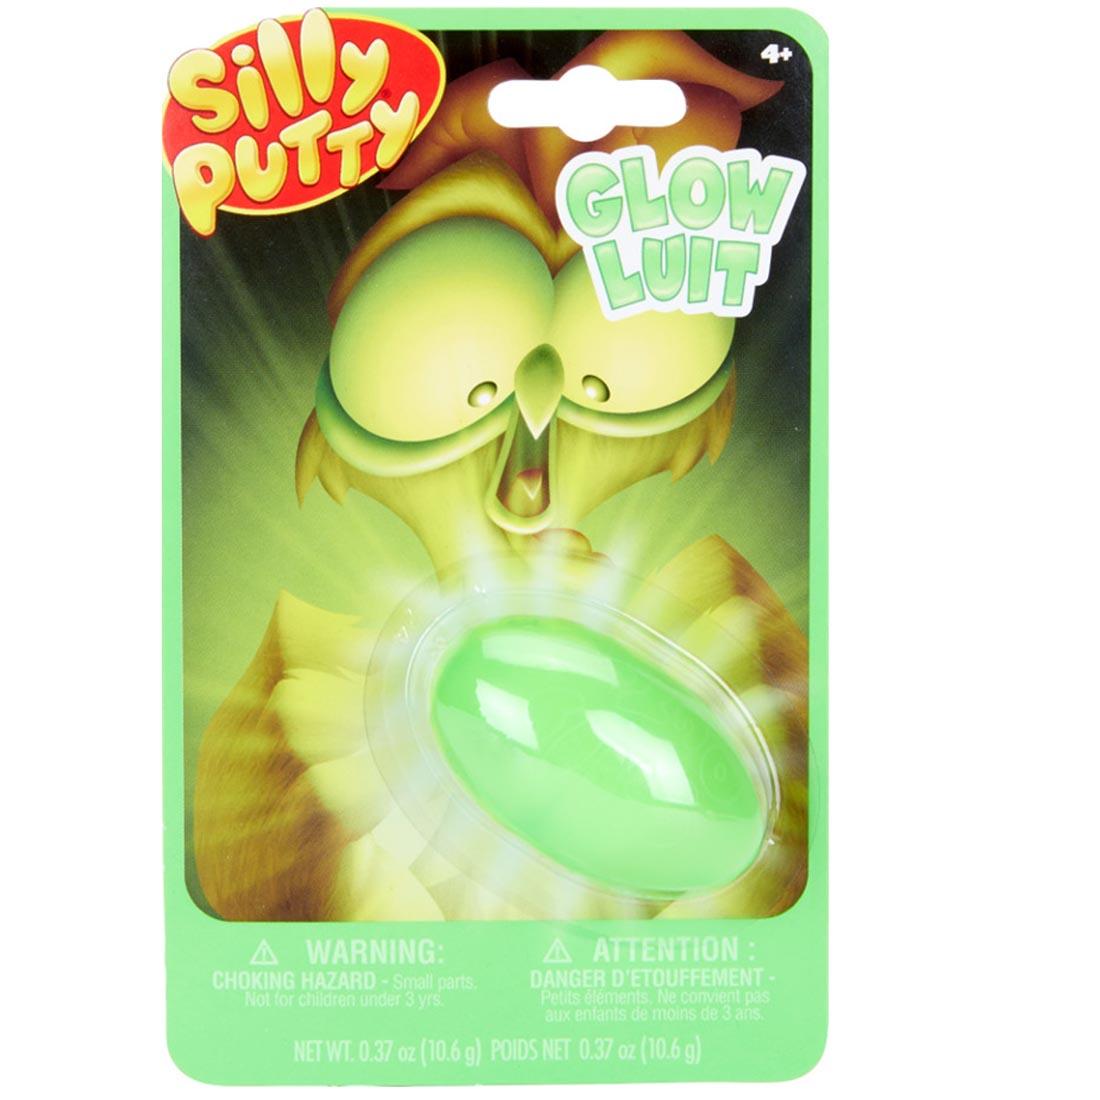 Glow Silly Putty package